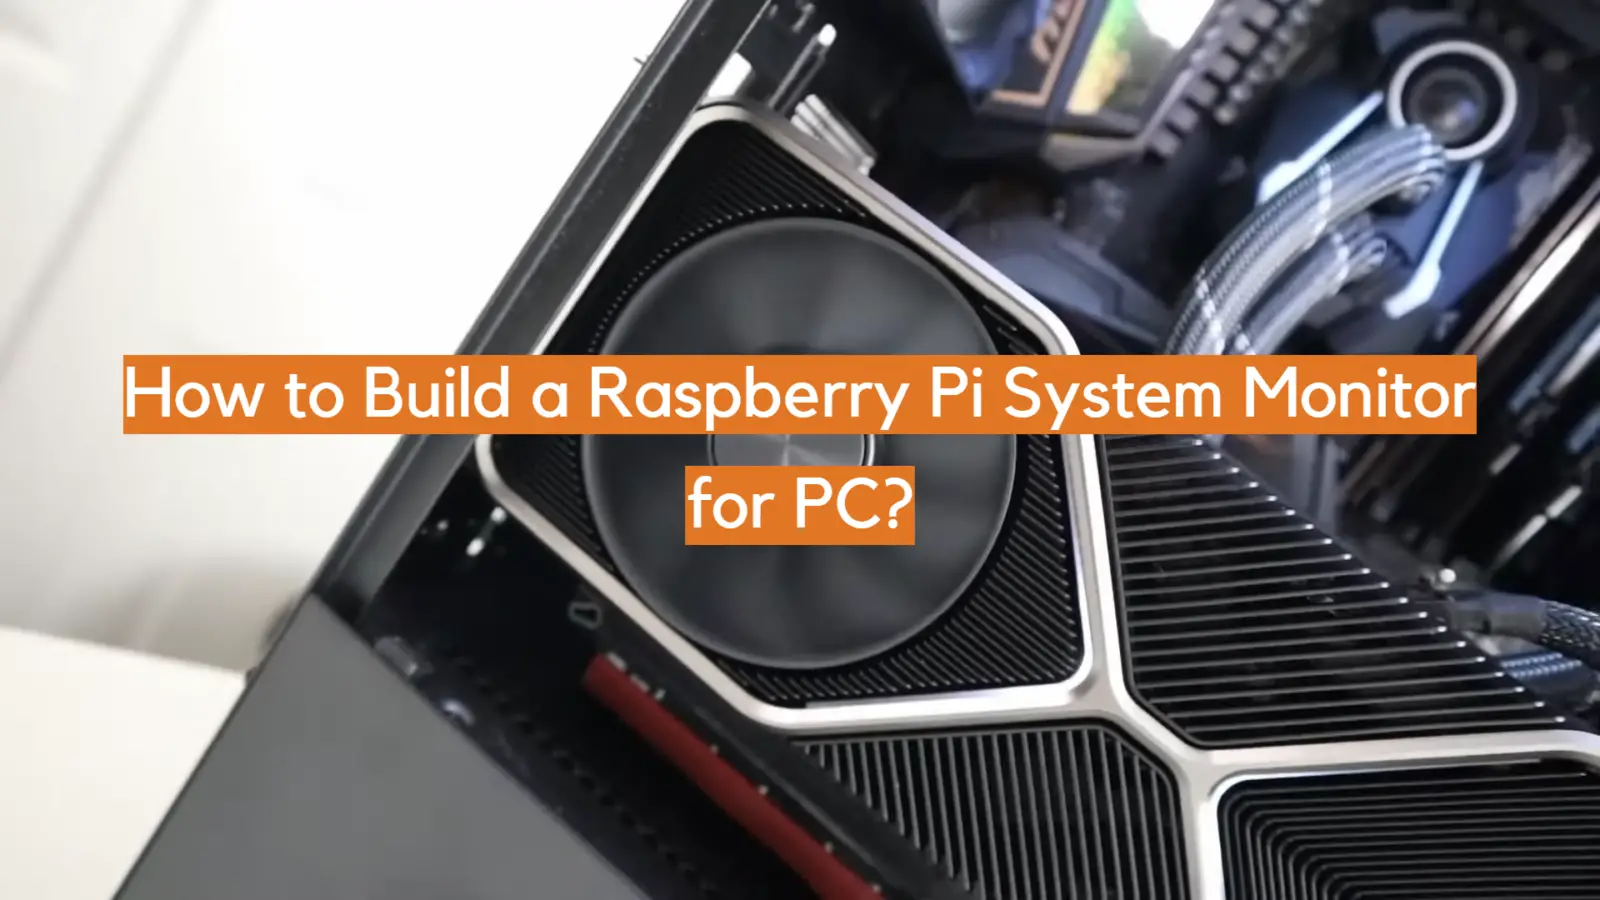 How to Build a Raspberry Pi System Monitor for PC?